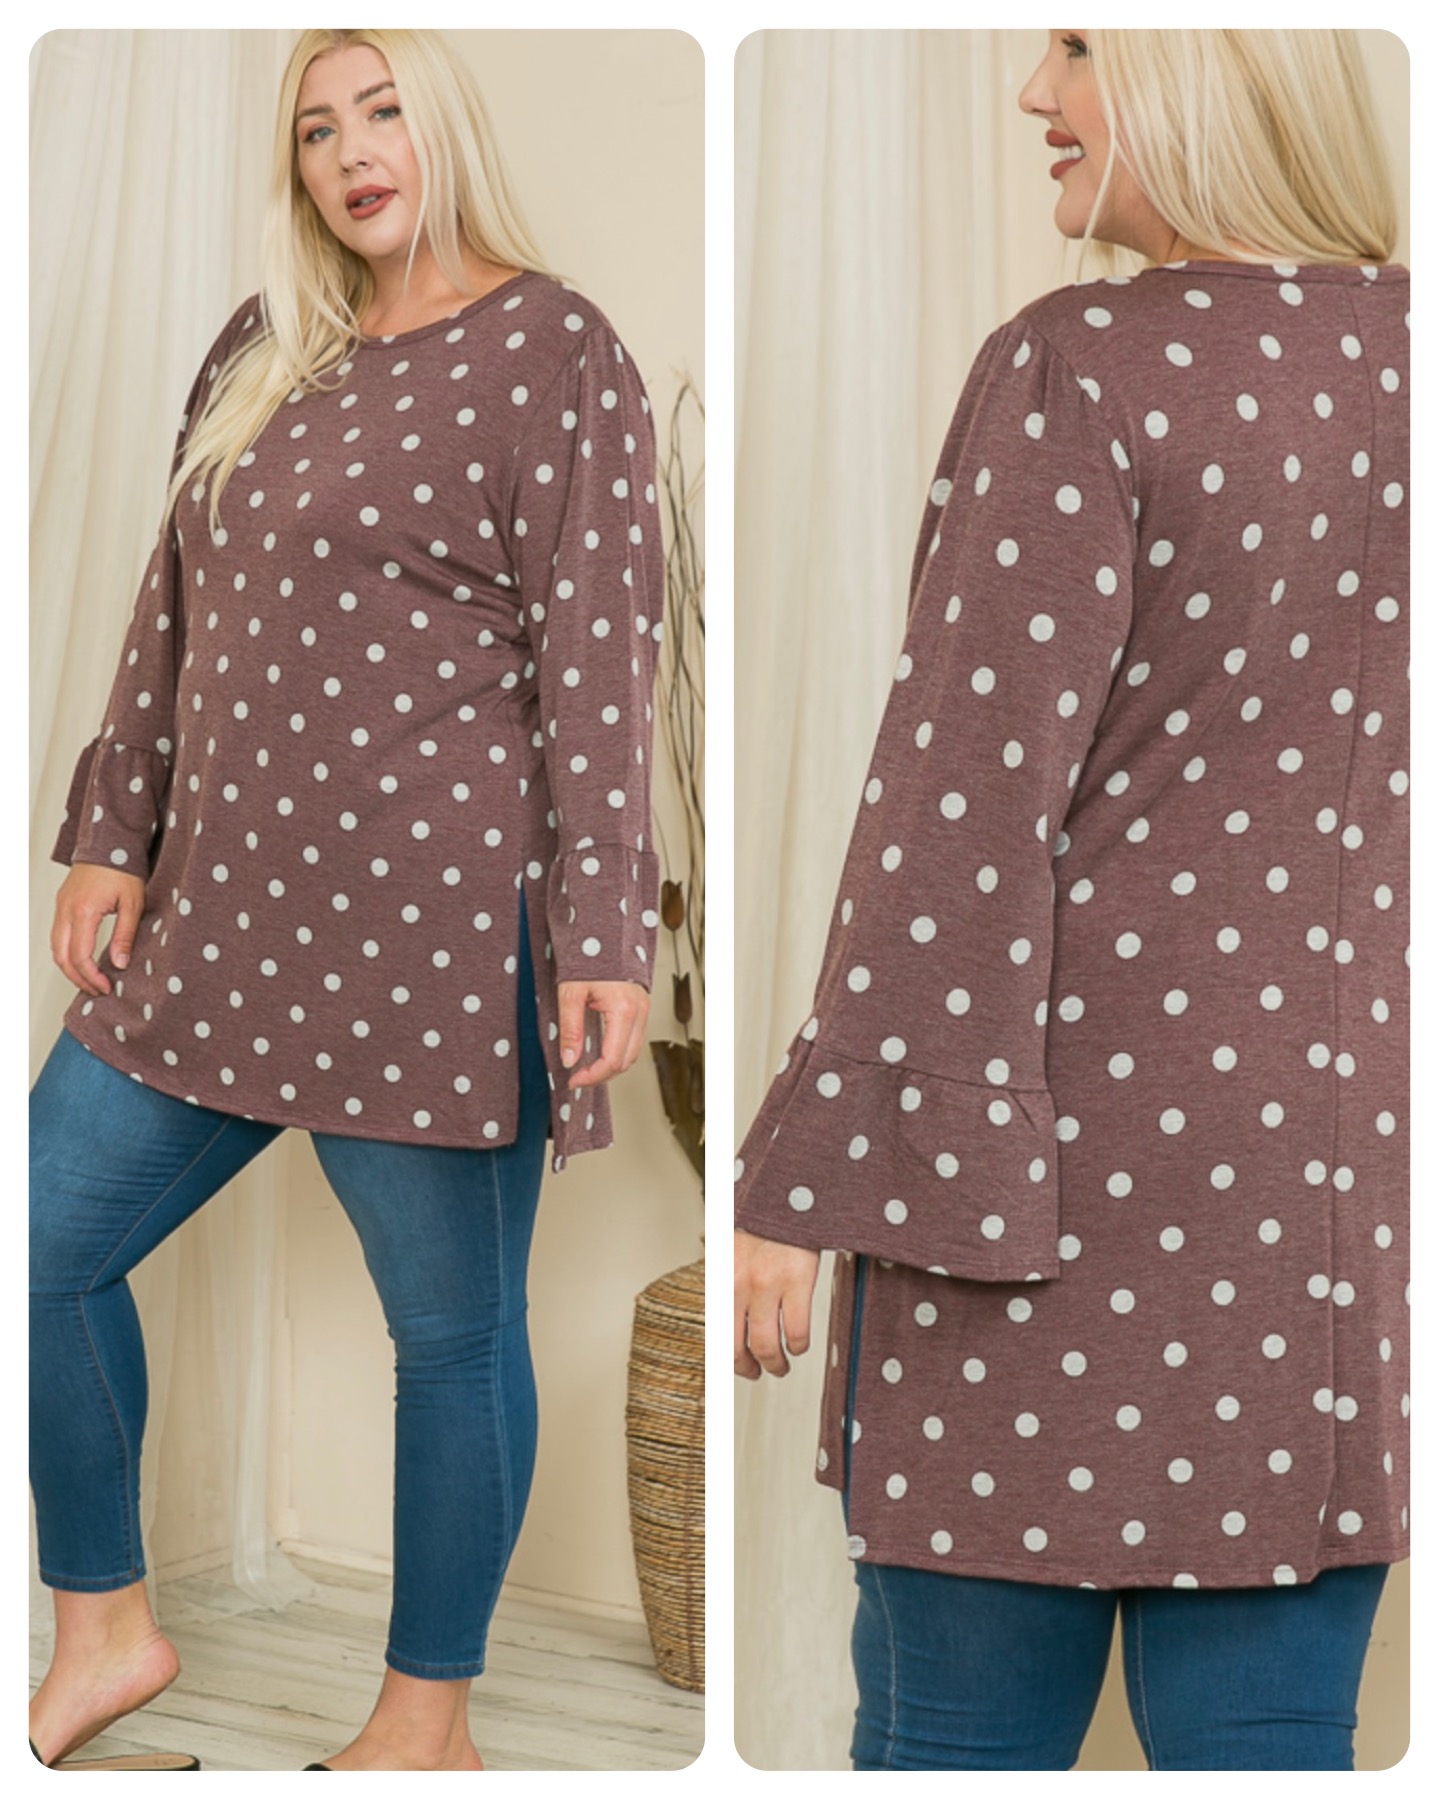 Size 5x
Cute polka dot tunic from Crepas
Bell Sleeves
poly/rayon/spandex